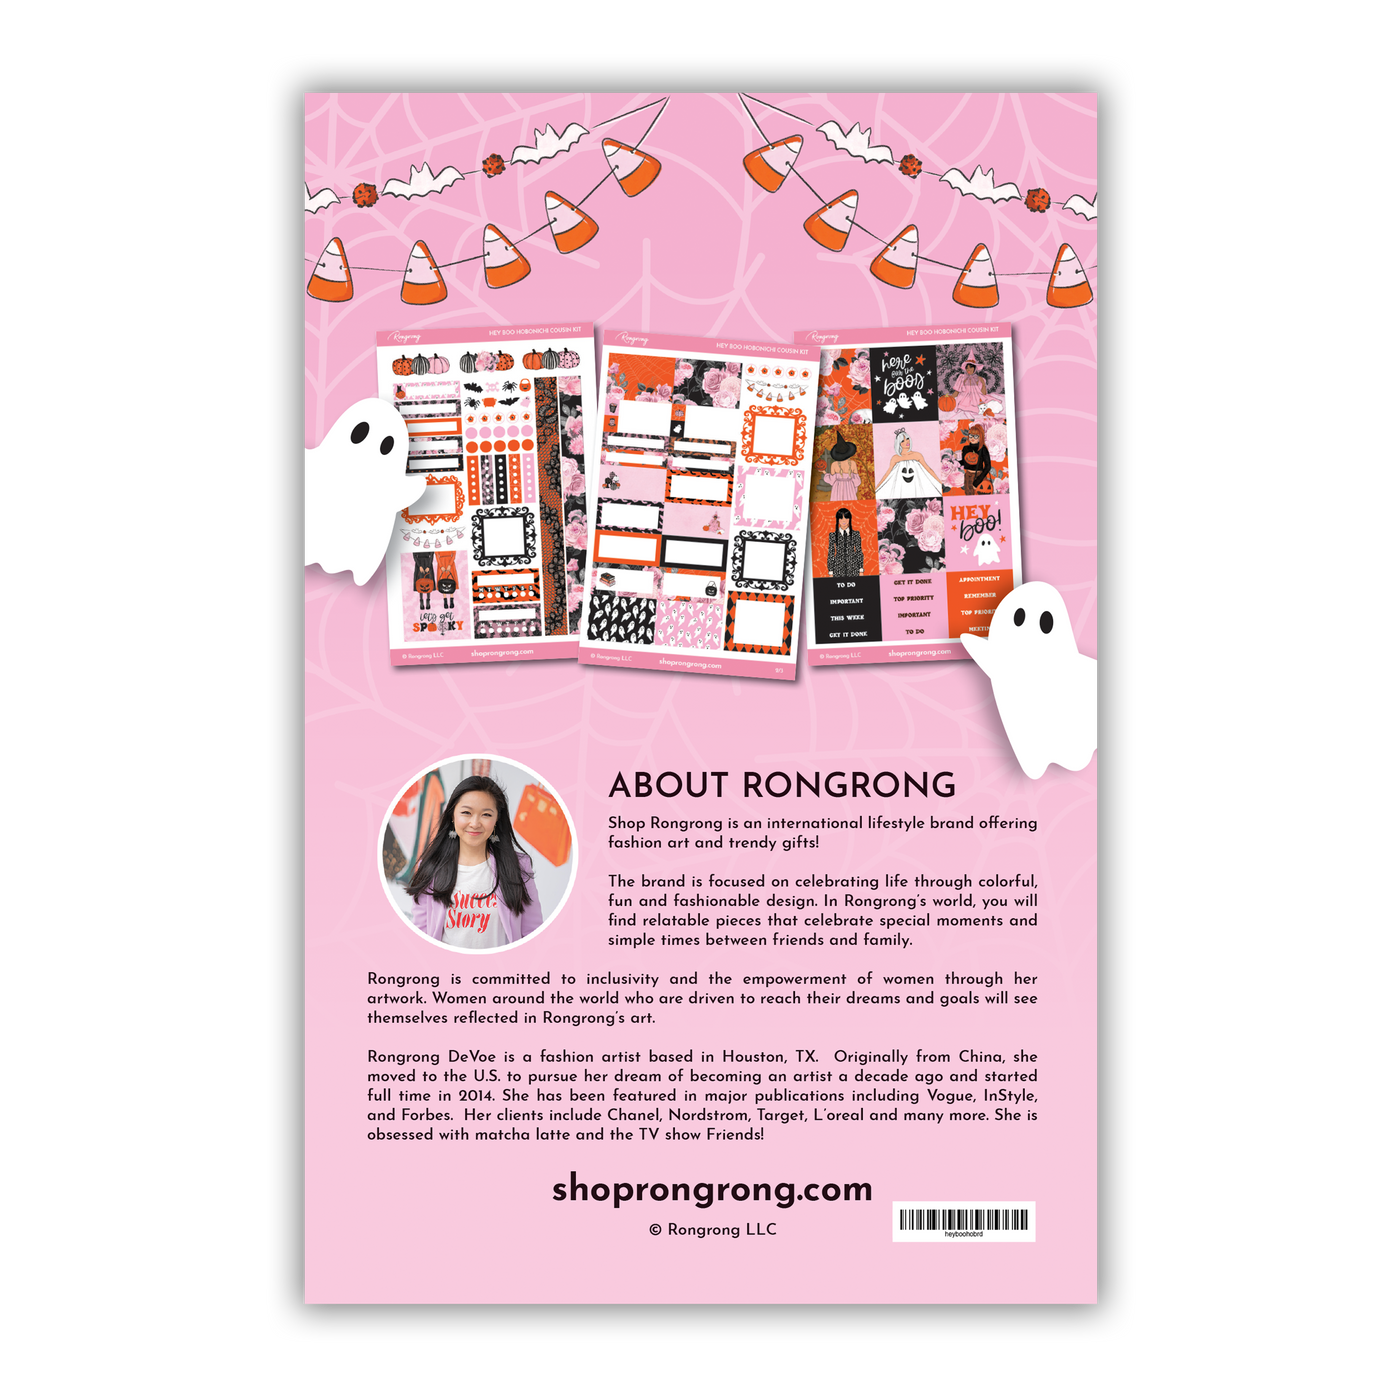 Shop Rongrong Hey Boo Hobonicchi Sticker Kit for Halloween